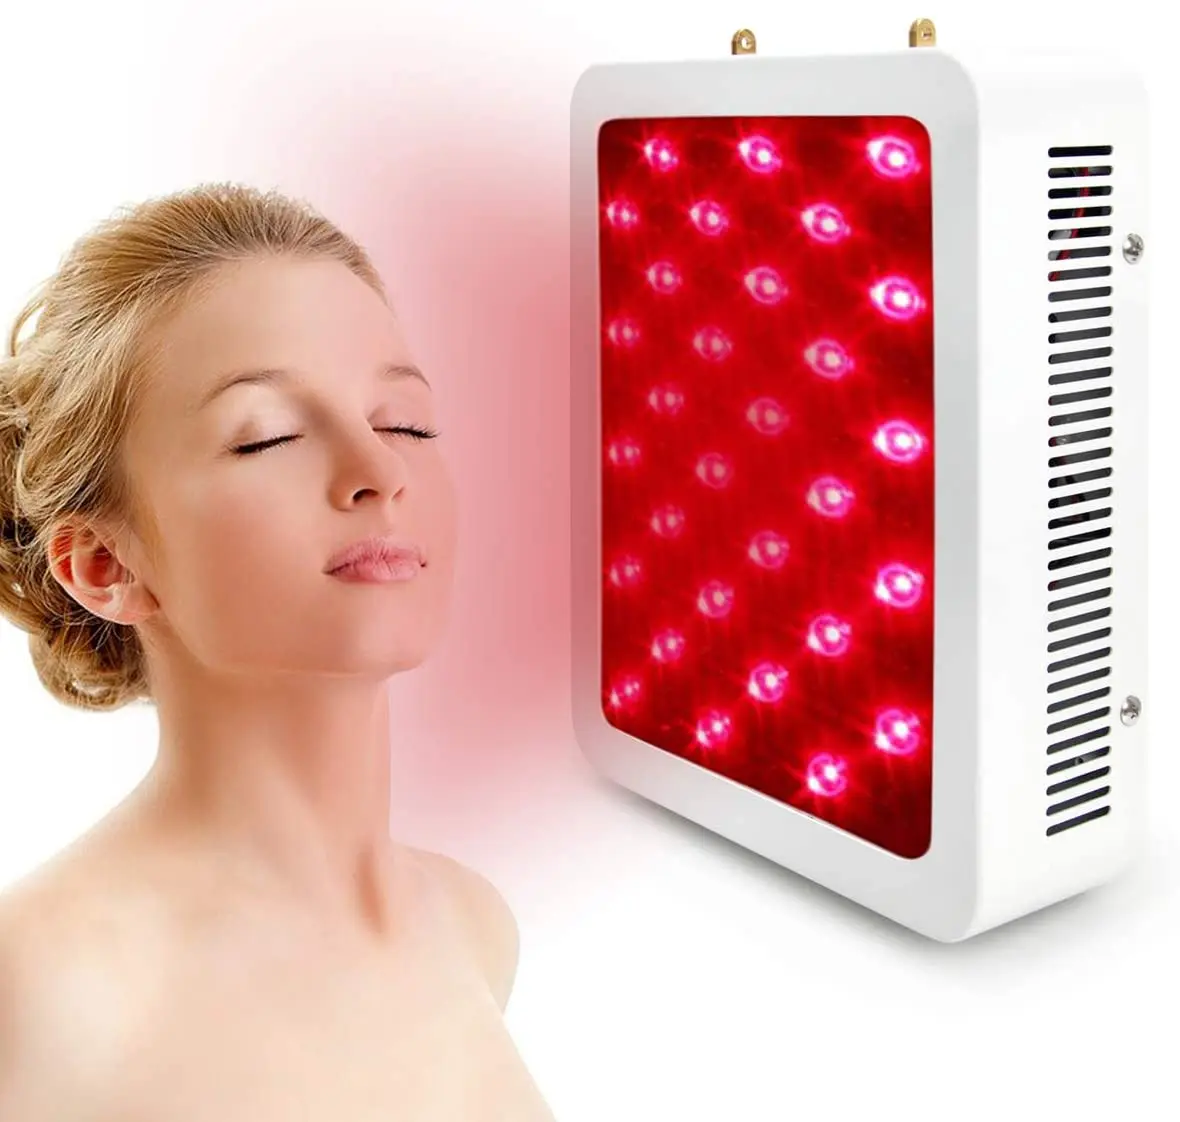 

300W Skin Light Therapy LED light Facial 660nm 850nm Red Near Infrared LED PDT Bio-light Therapy, White